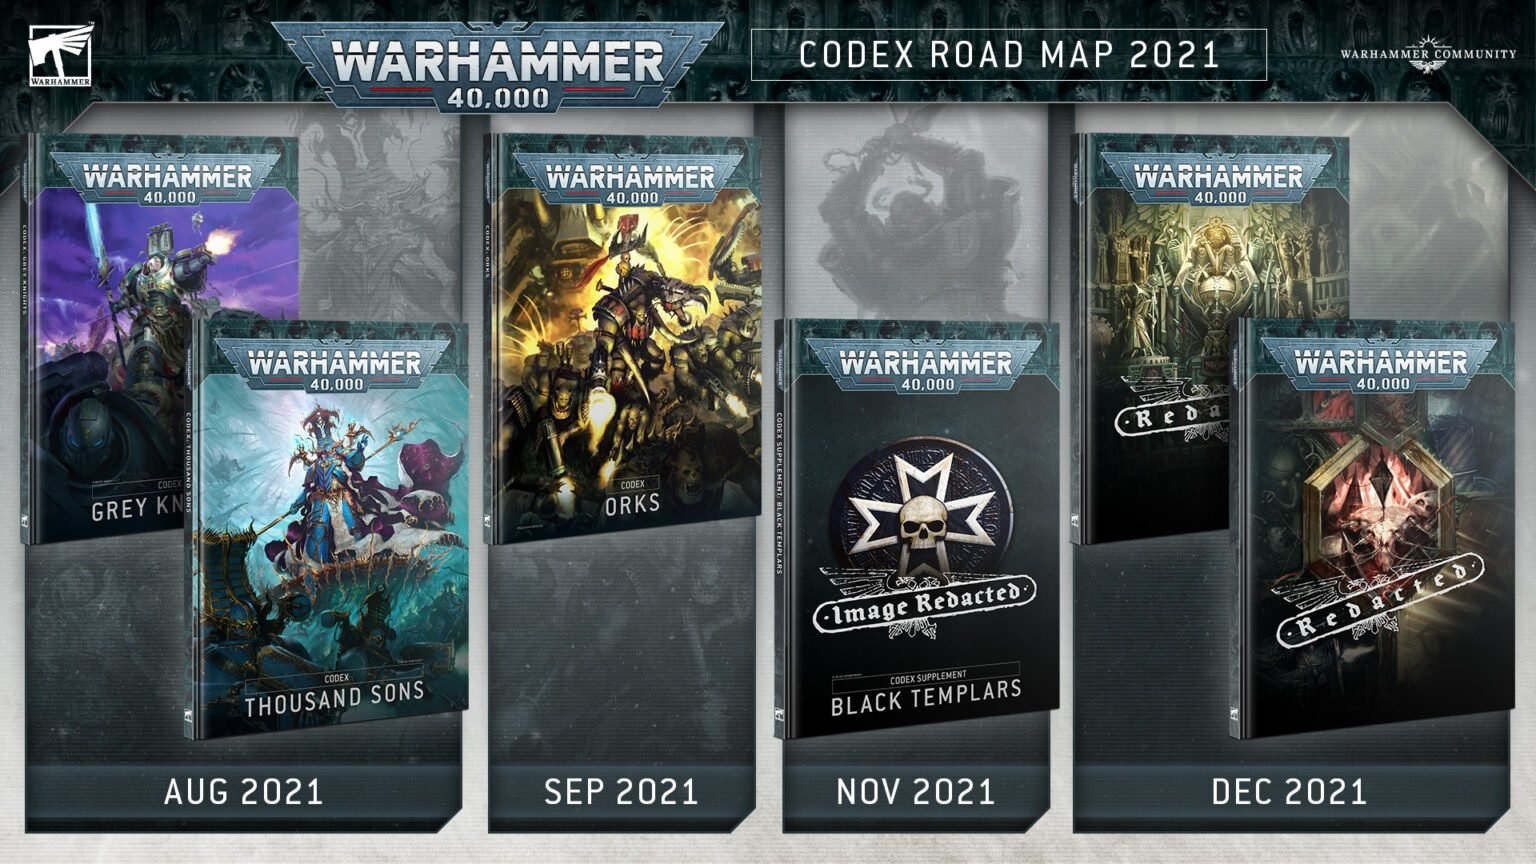 Goatboy's Warhammer 40K We Need to Talk About the Codex Roadmap Bell